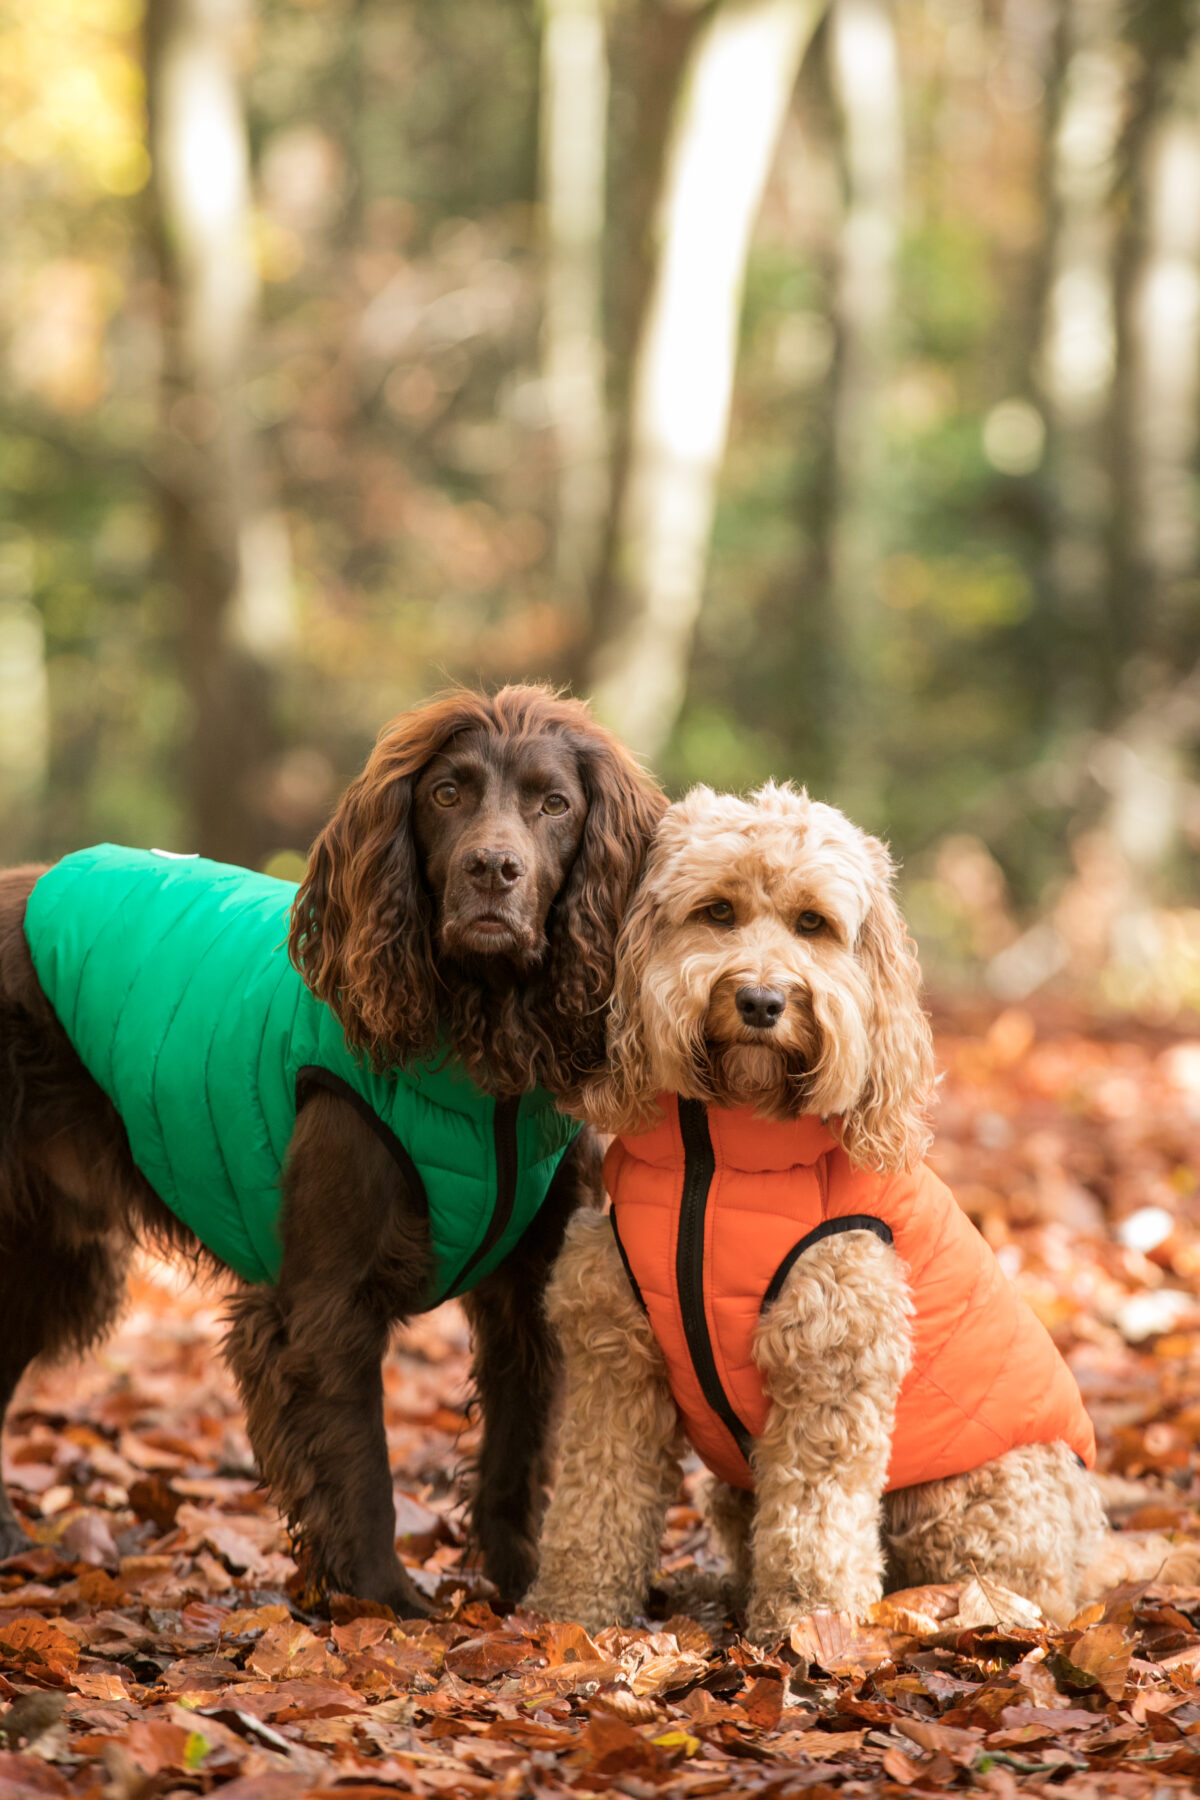 More about our Hugo & Hudson Reversible Dog Puffer Jacket – Orange and Navy | Water Resistant | Collar Attachment Hole from Catdog Store